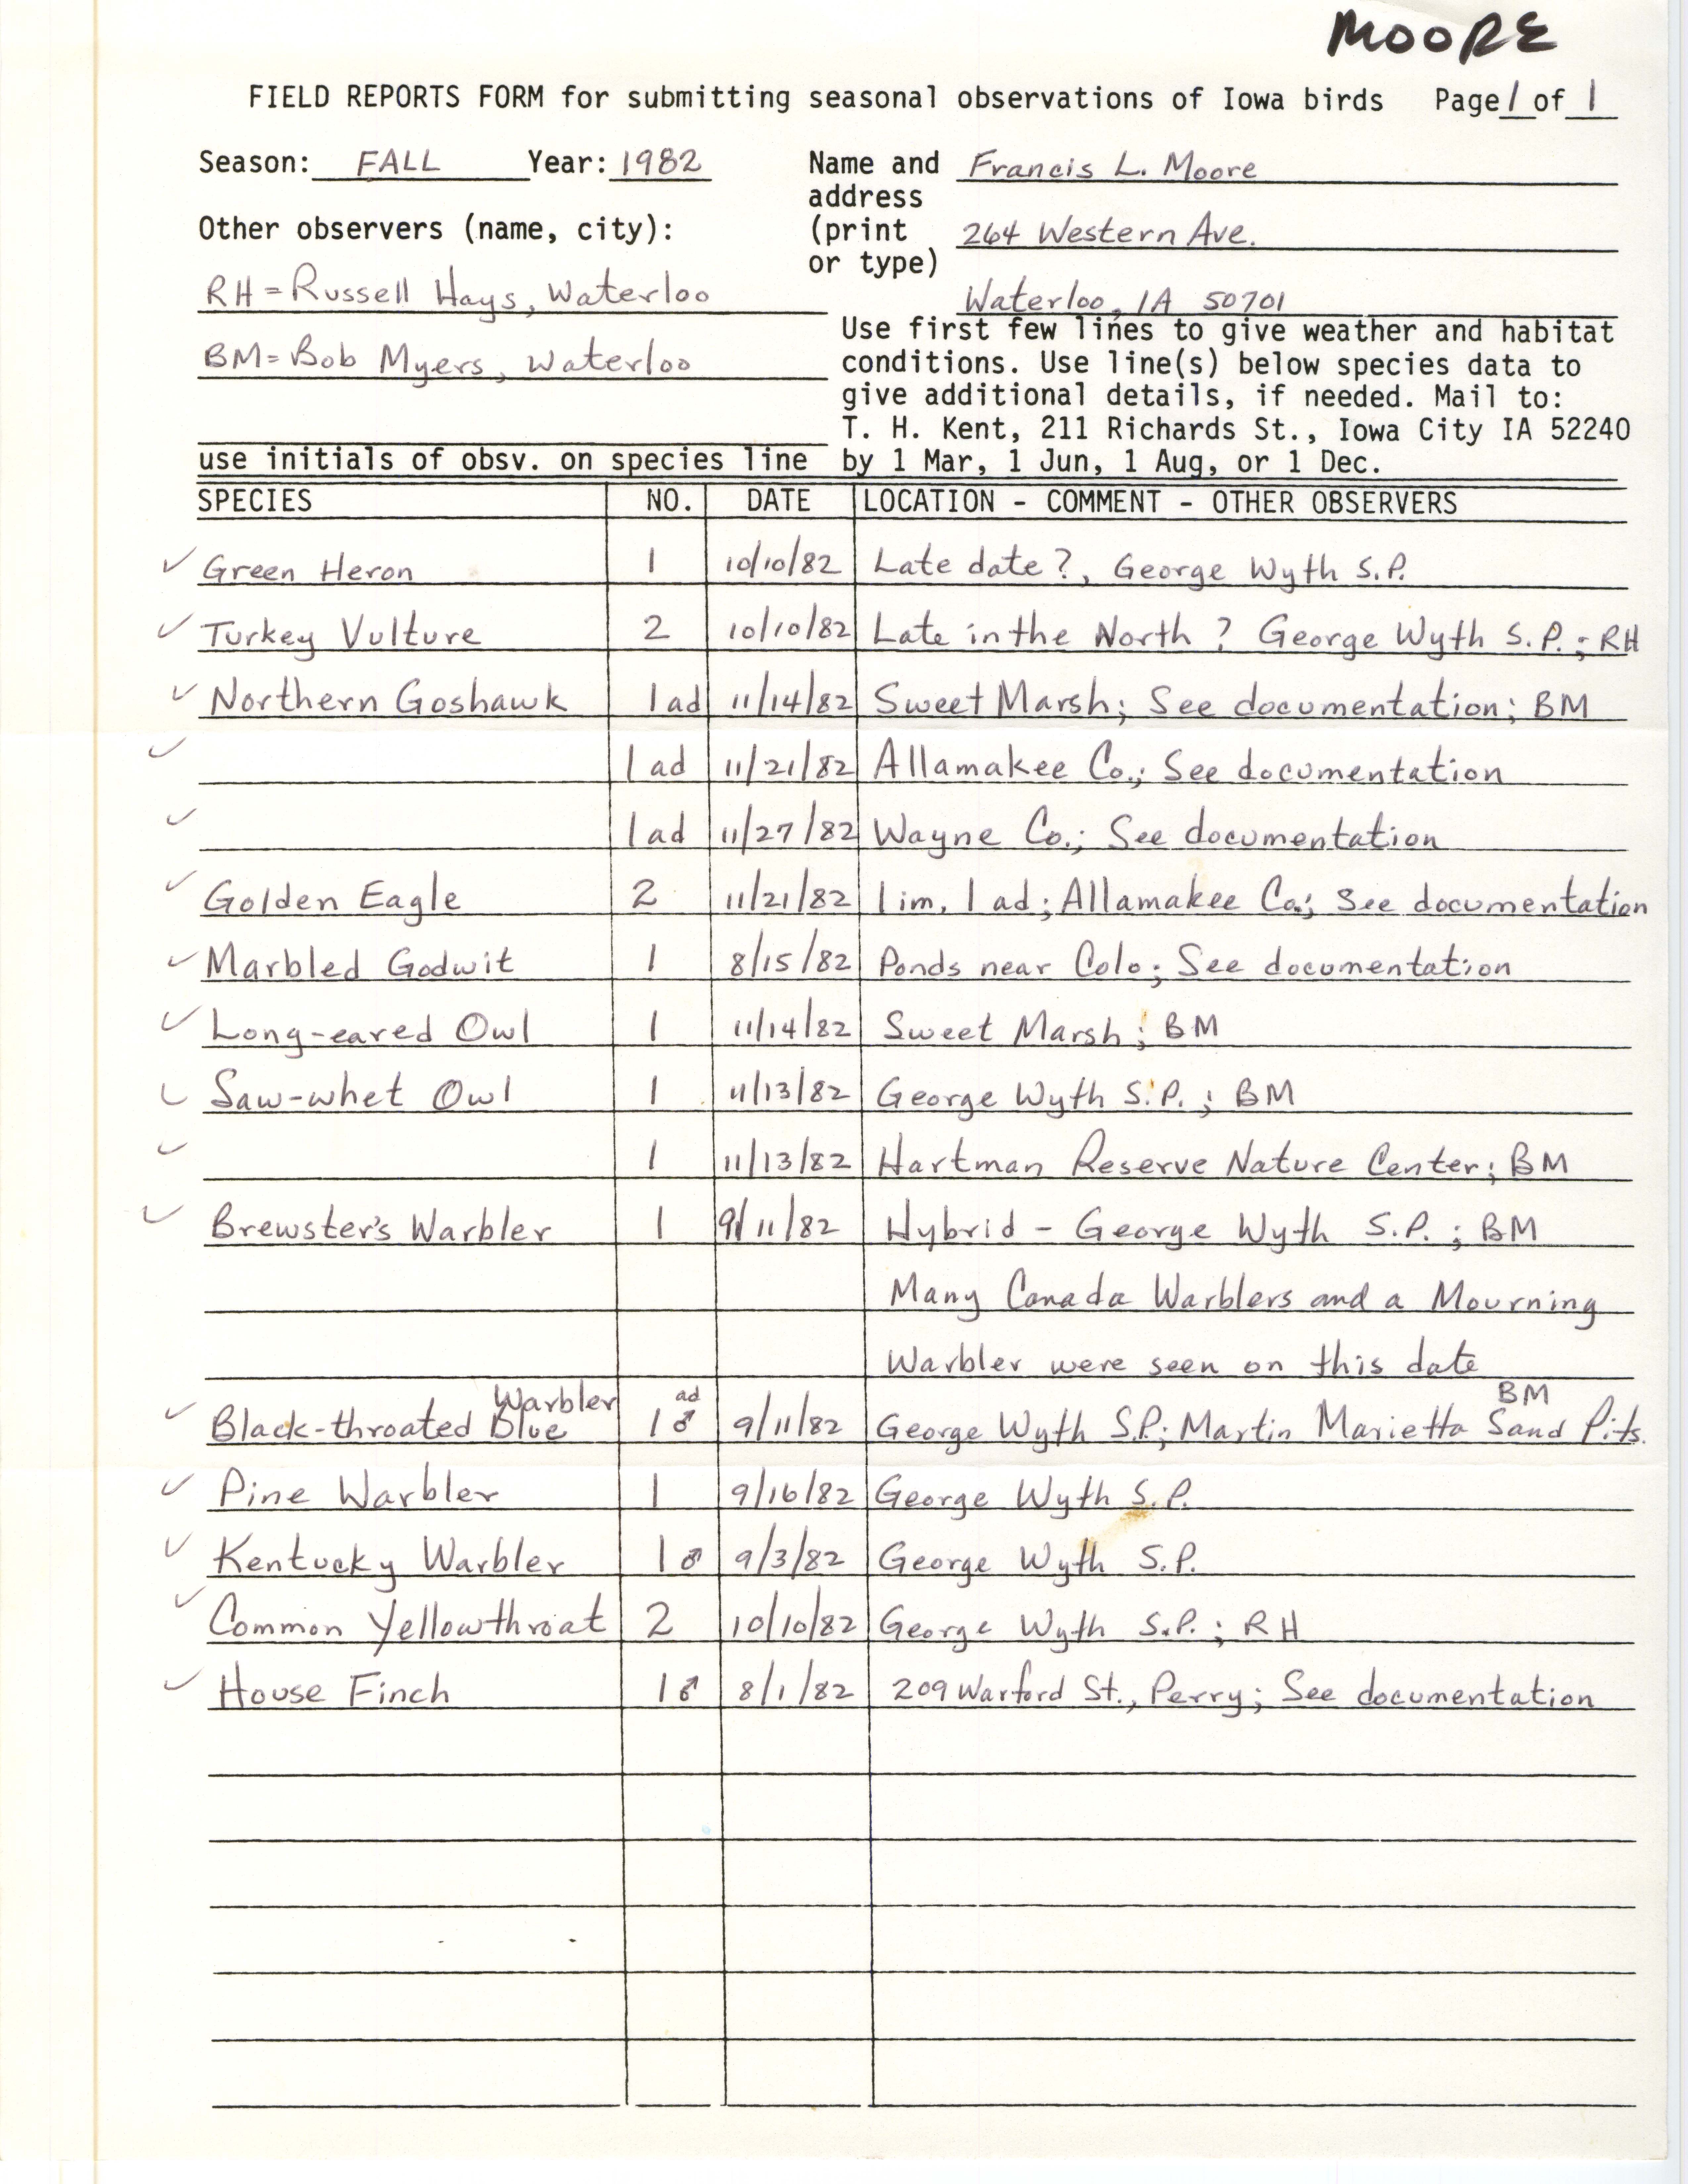 Field notes contributed by Francis L. Moore, fall 1982